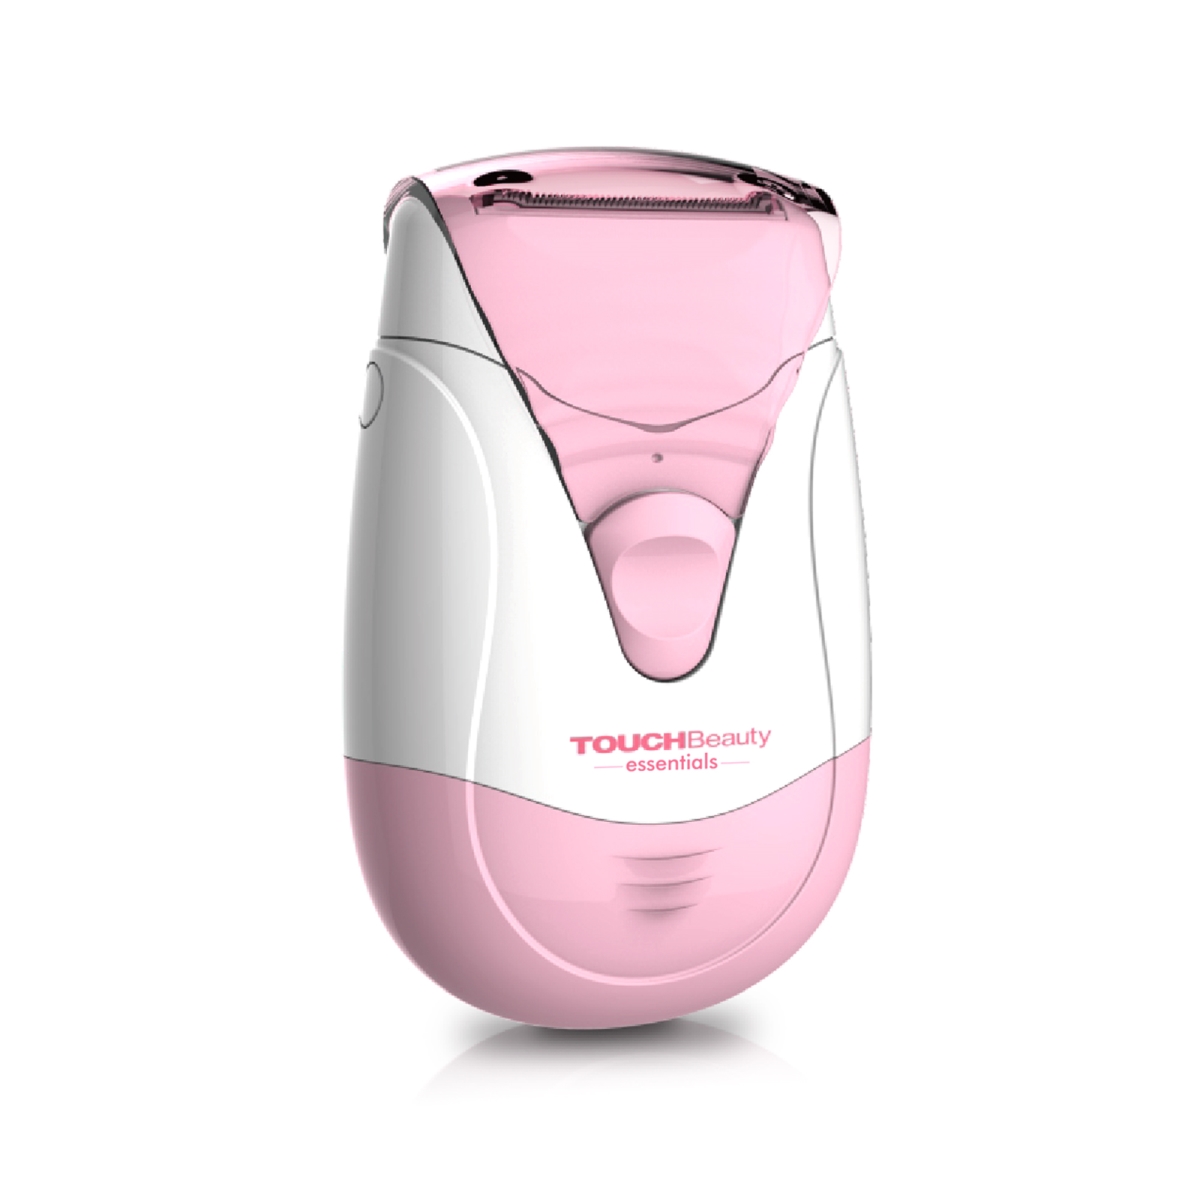 Tb-0806 Touch Beauty Electric Lady Shaver